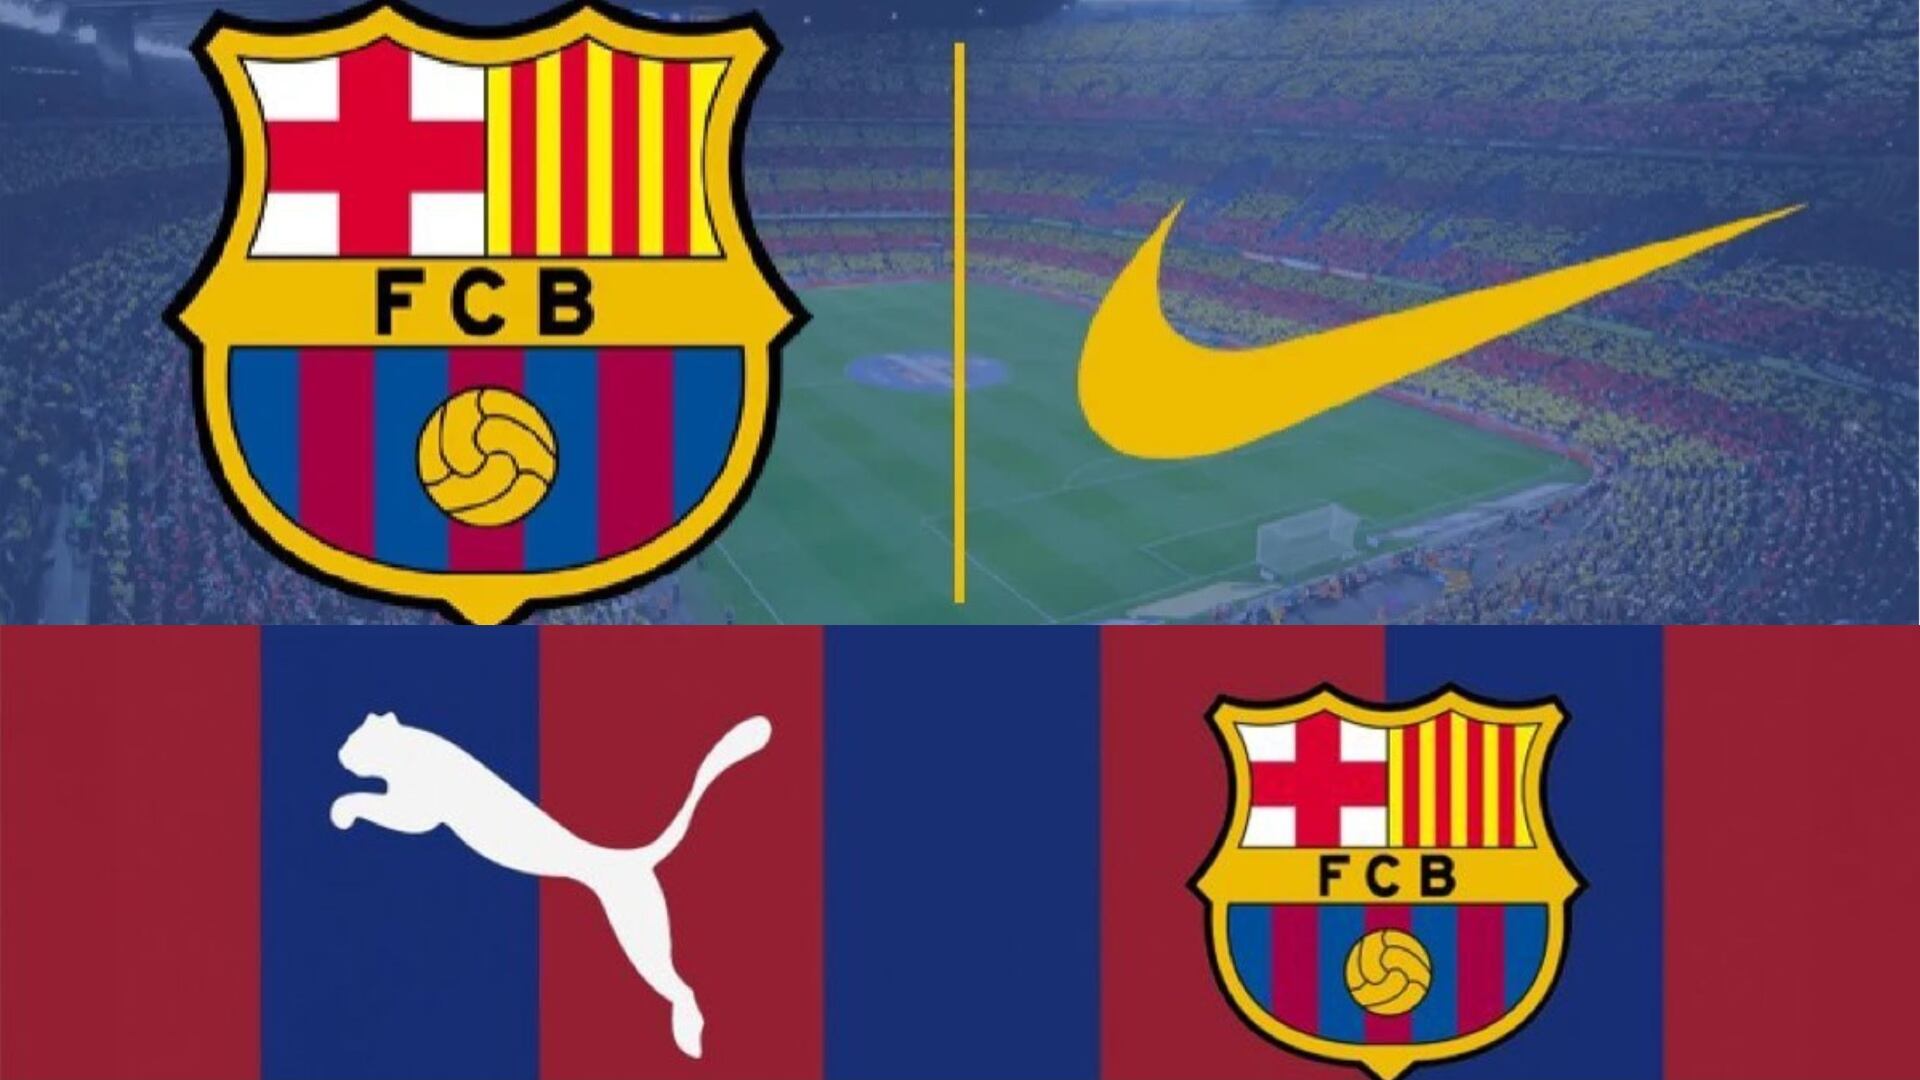 While Nike offers $115M a season, Puma offers a bigger deal for FC Barcelona